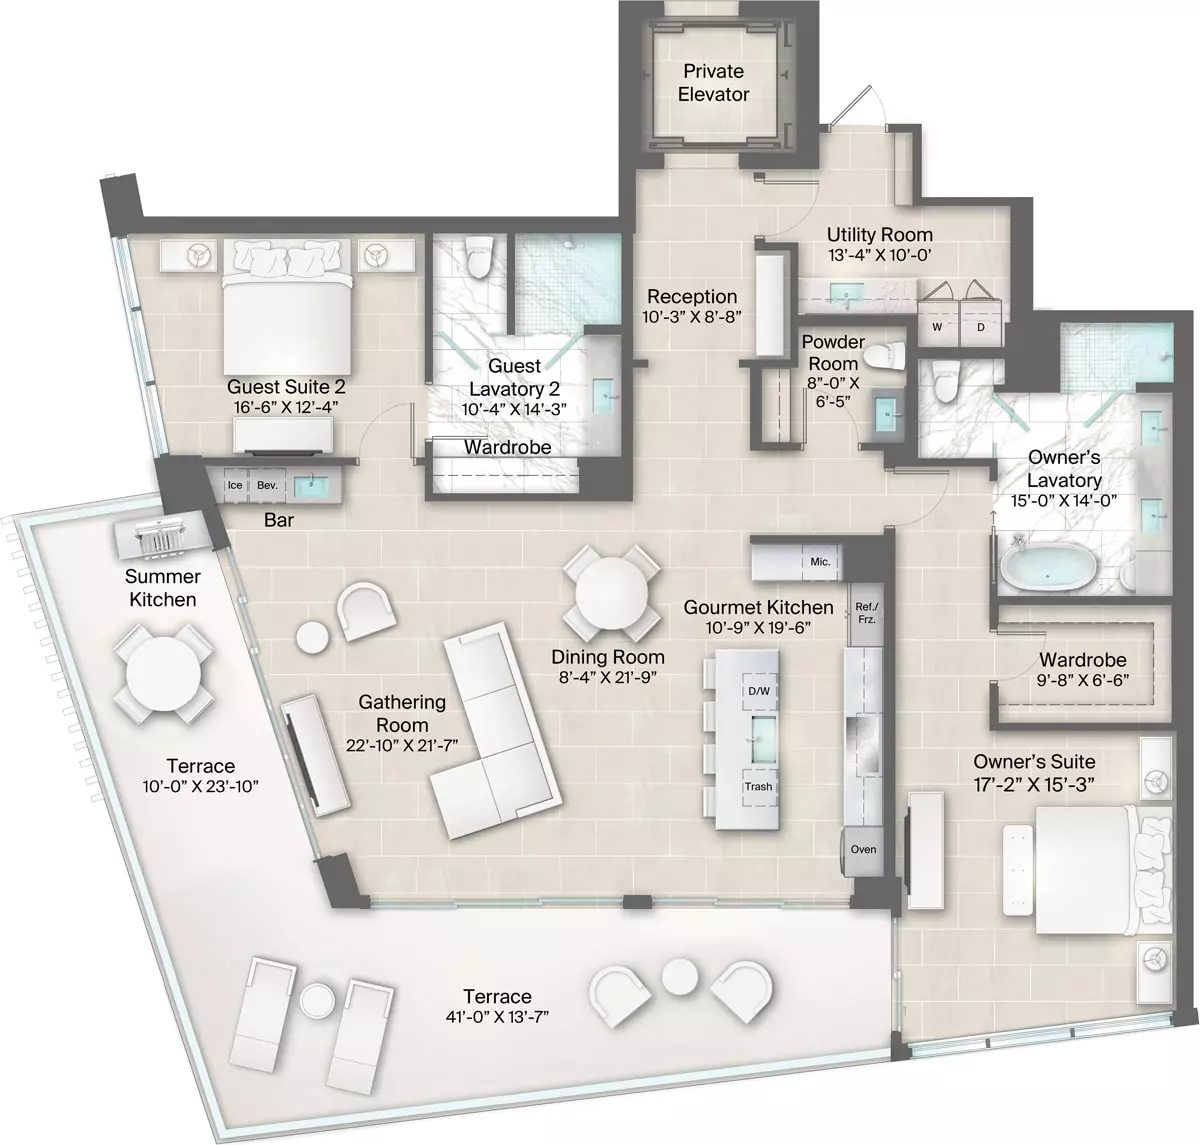 Champagne Building, Plan 12 & 13 Floorplan includes 2 bedrooms, 2.5 baths and terrace